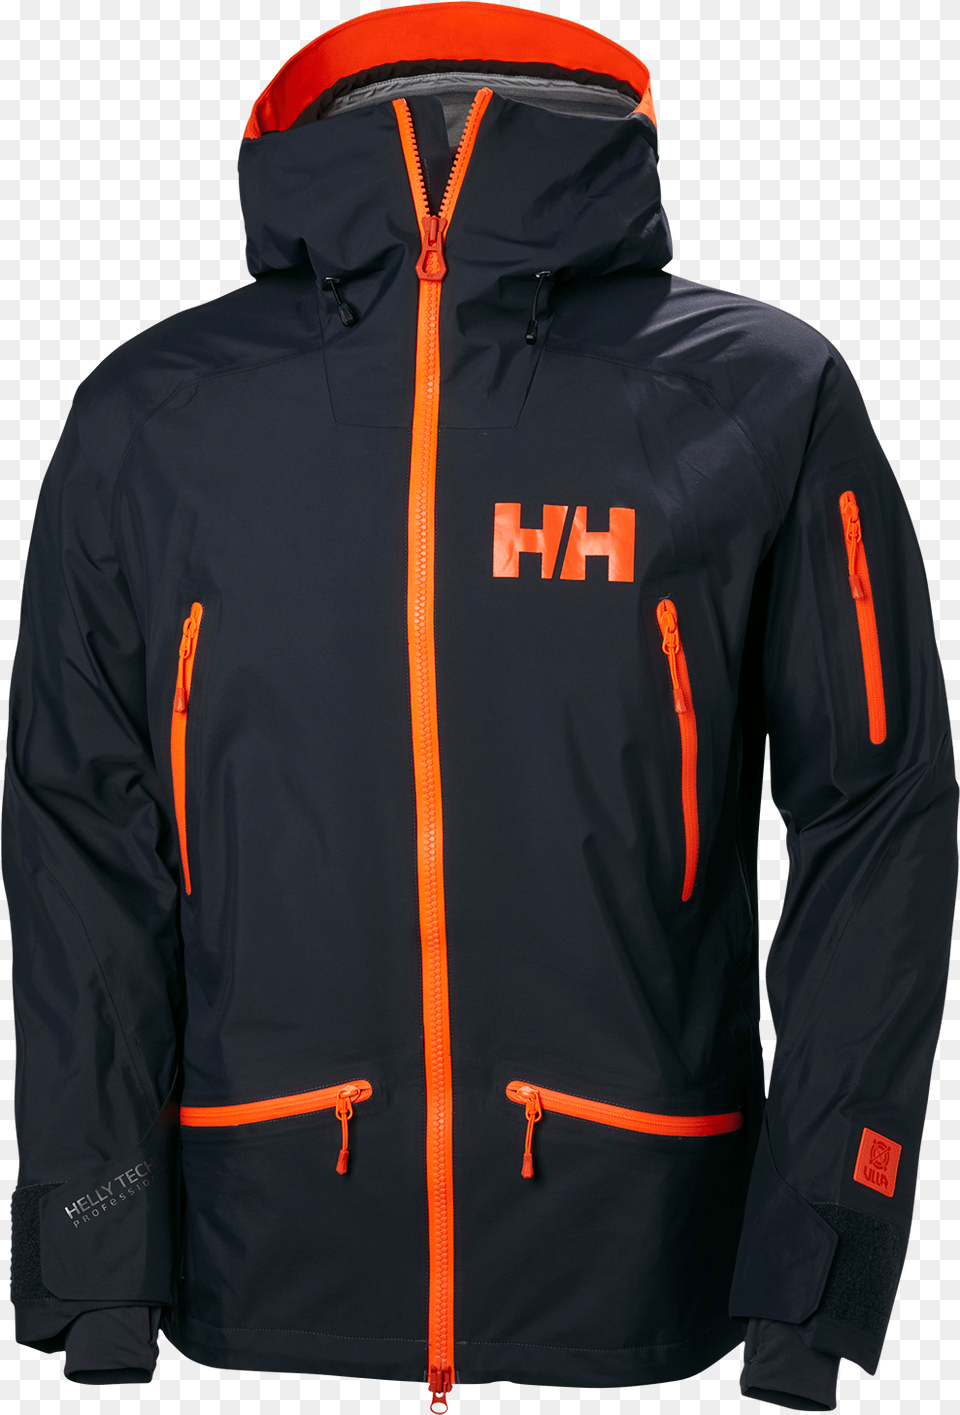 Jacket Clothes Transparent Background Images Helly Hansen Ridge Shell Jacket, Clothing, Coat, Hoodie, Knitwear Png Image